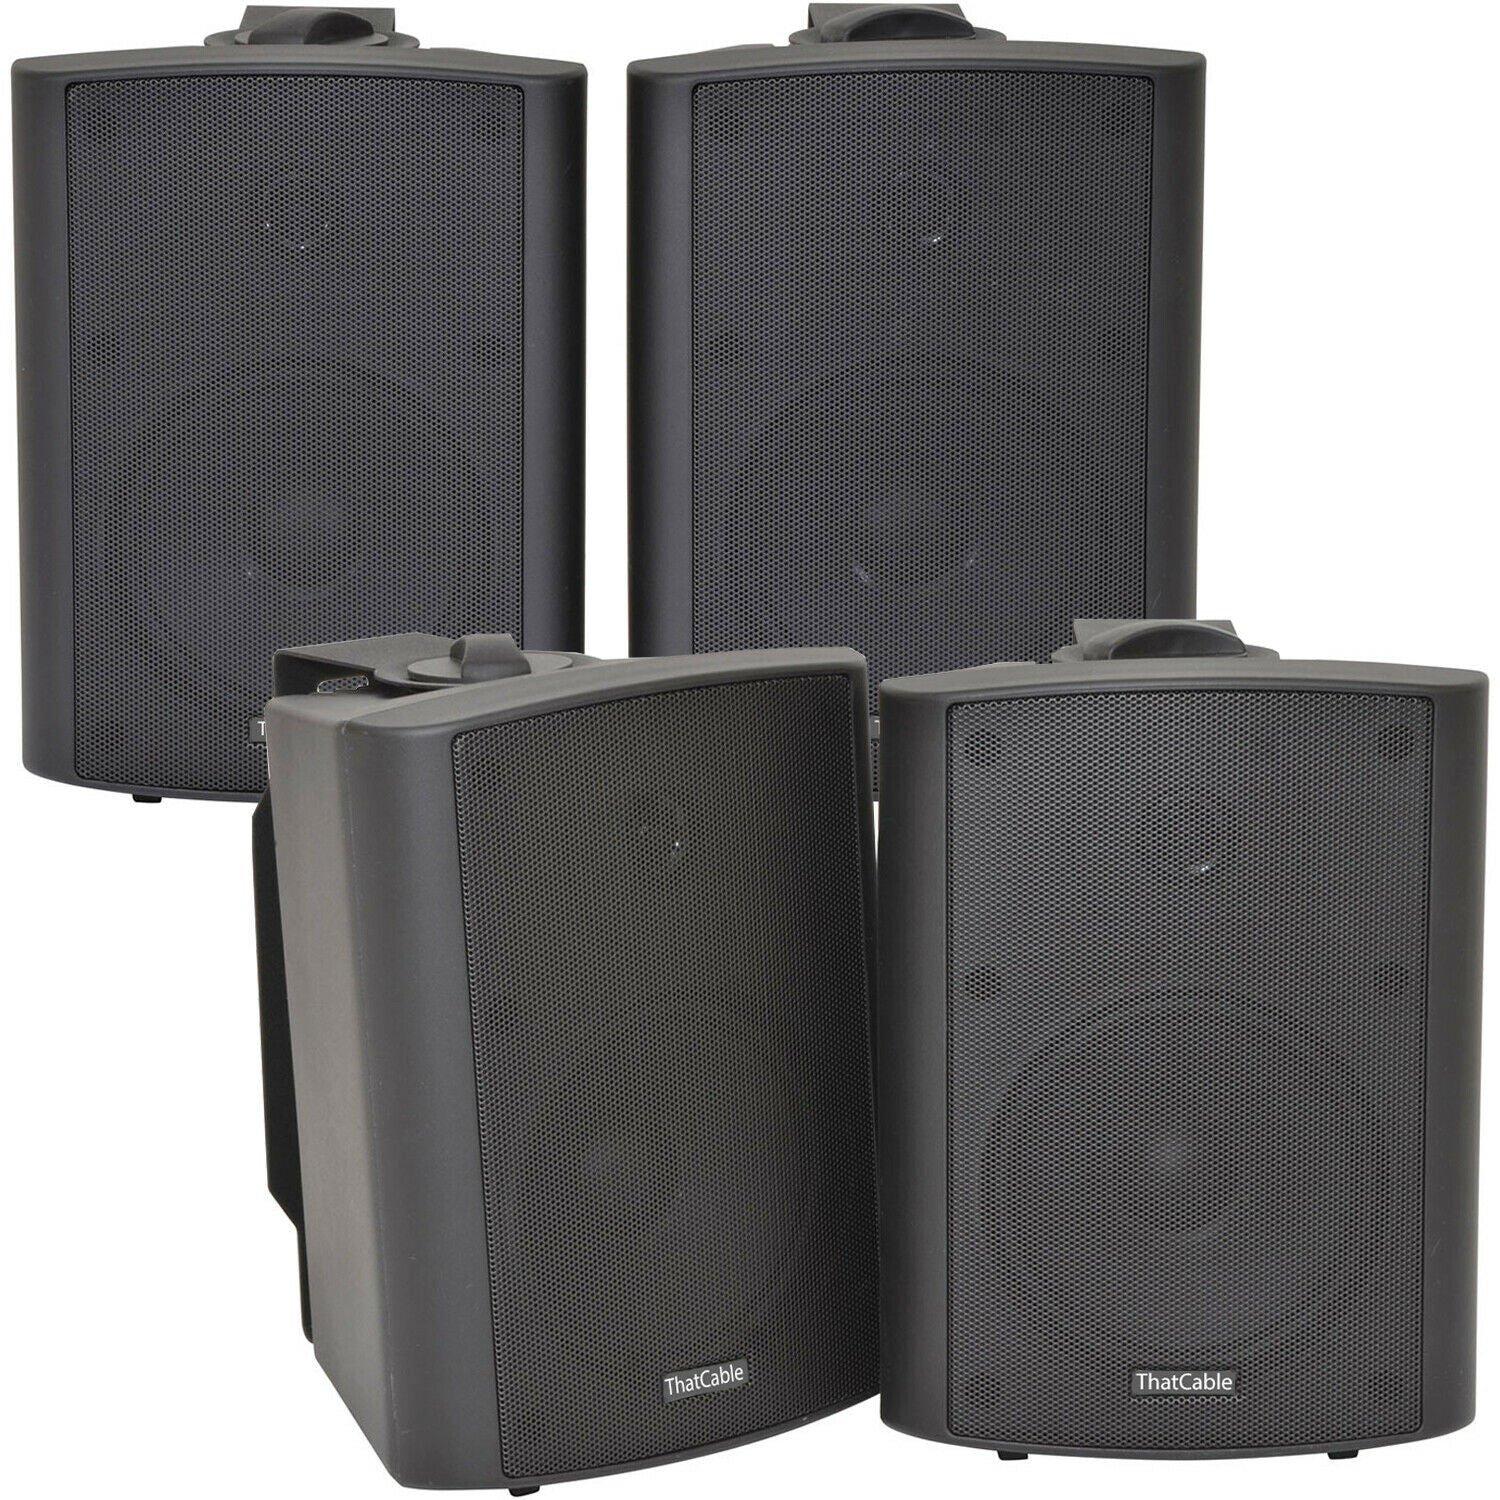 4x 90W Black Wall Mounted Stereo Speakers 5.25